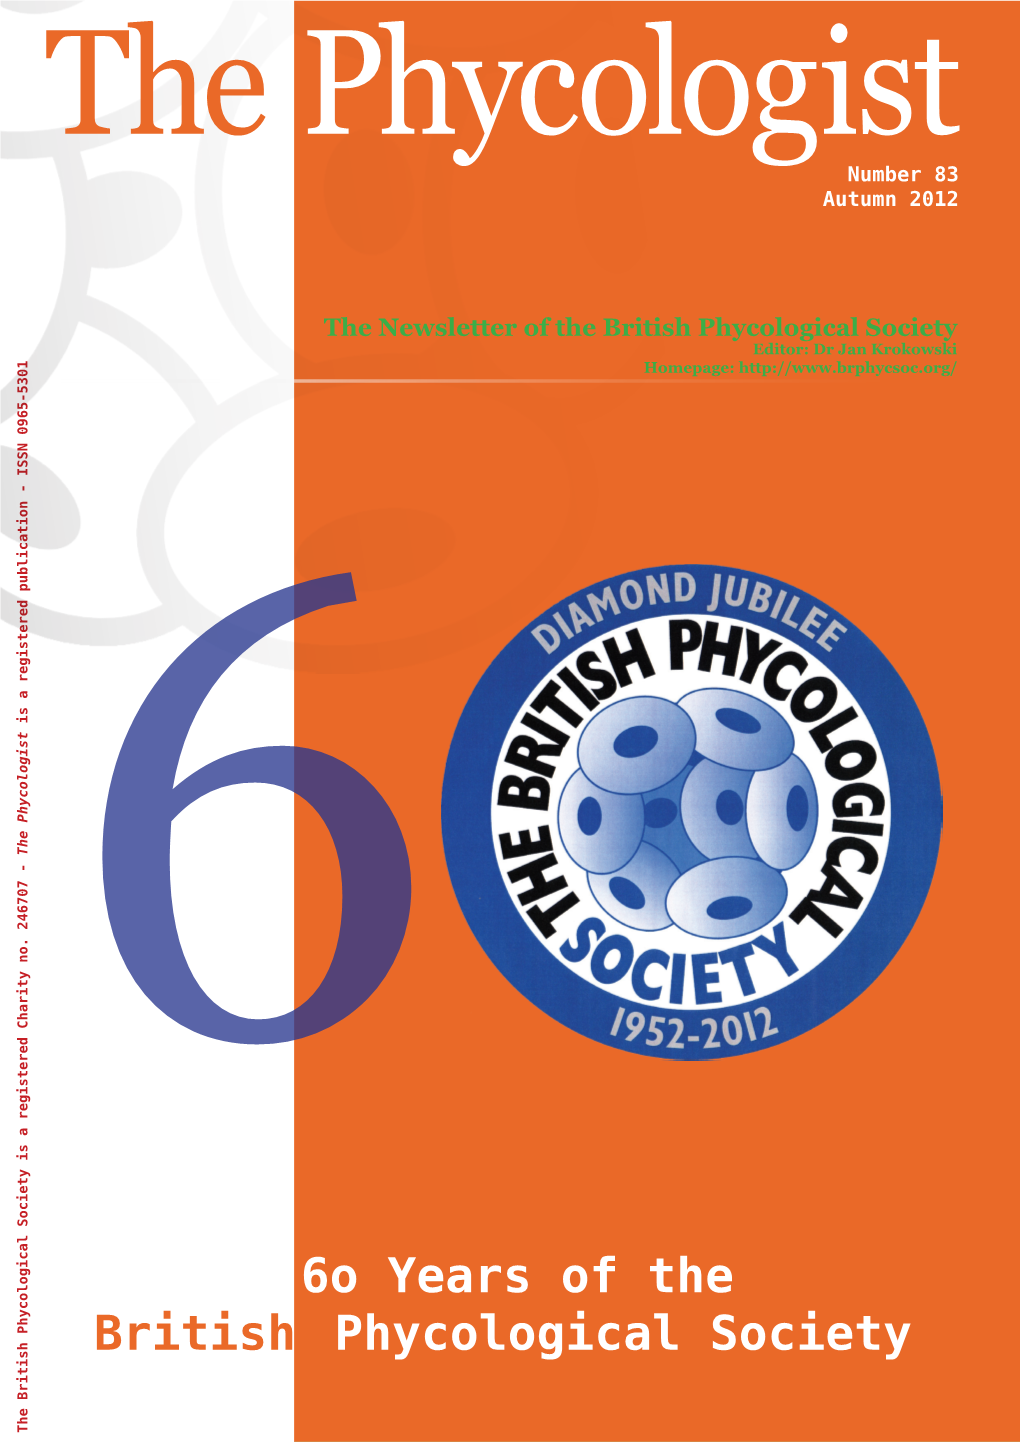 6O Years of the British Phycological Society